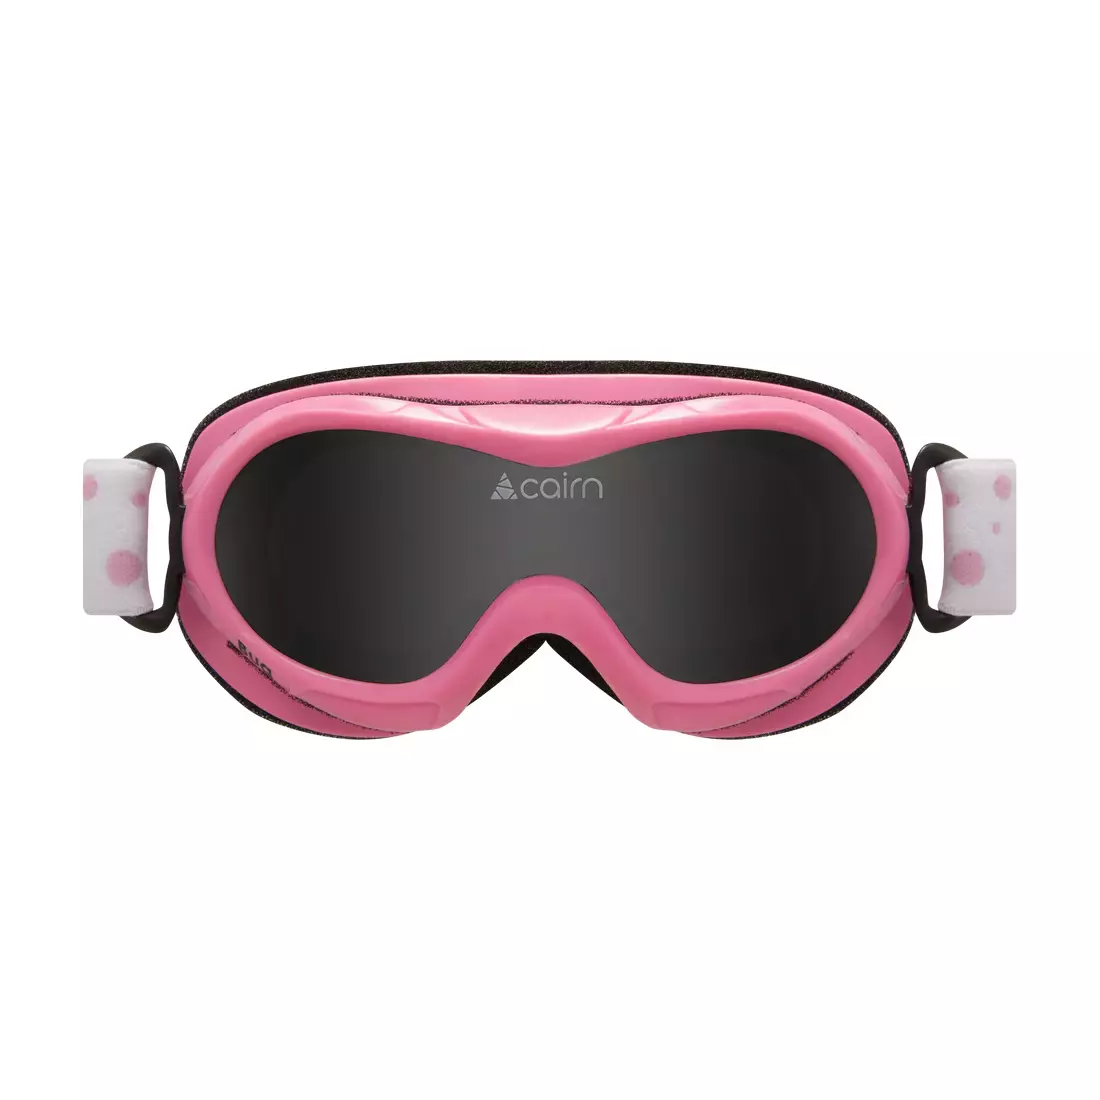 CAIRN BUG children's bicycle goggles, pink